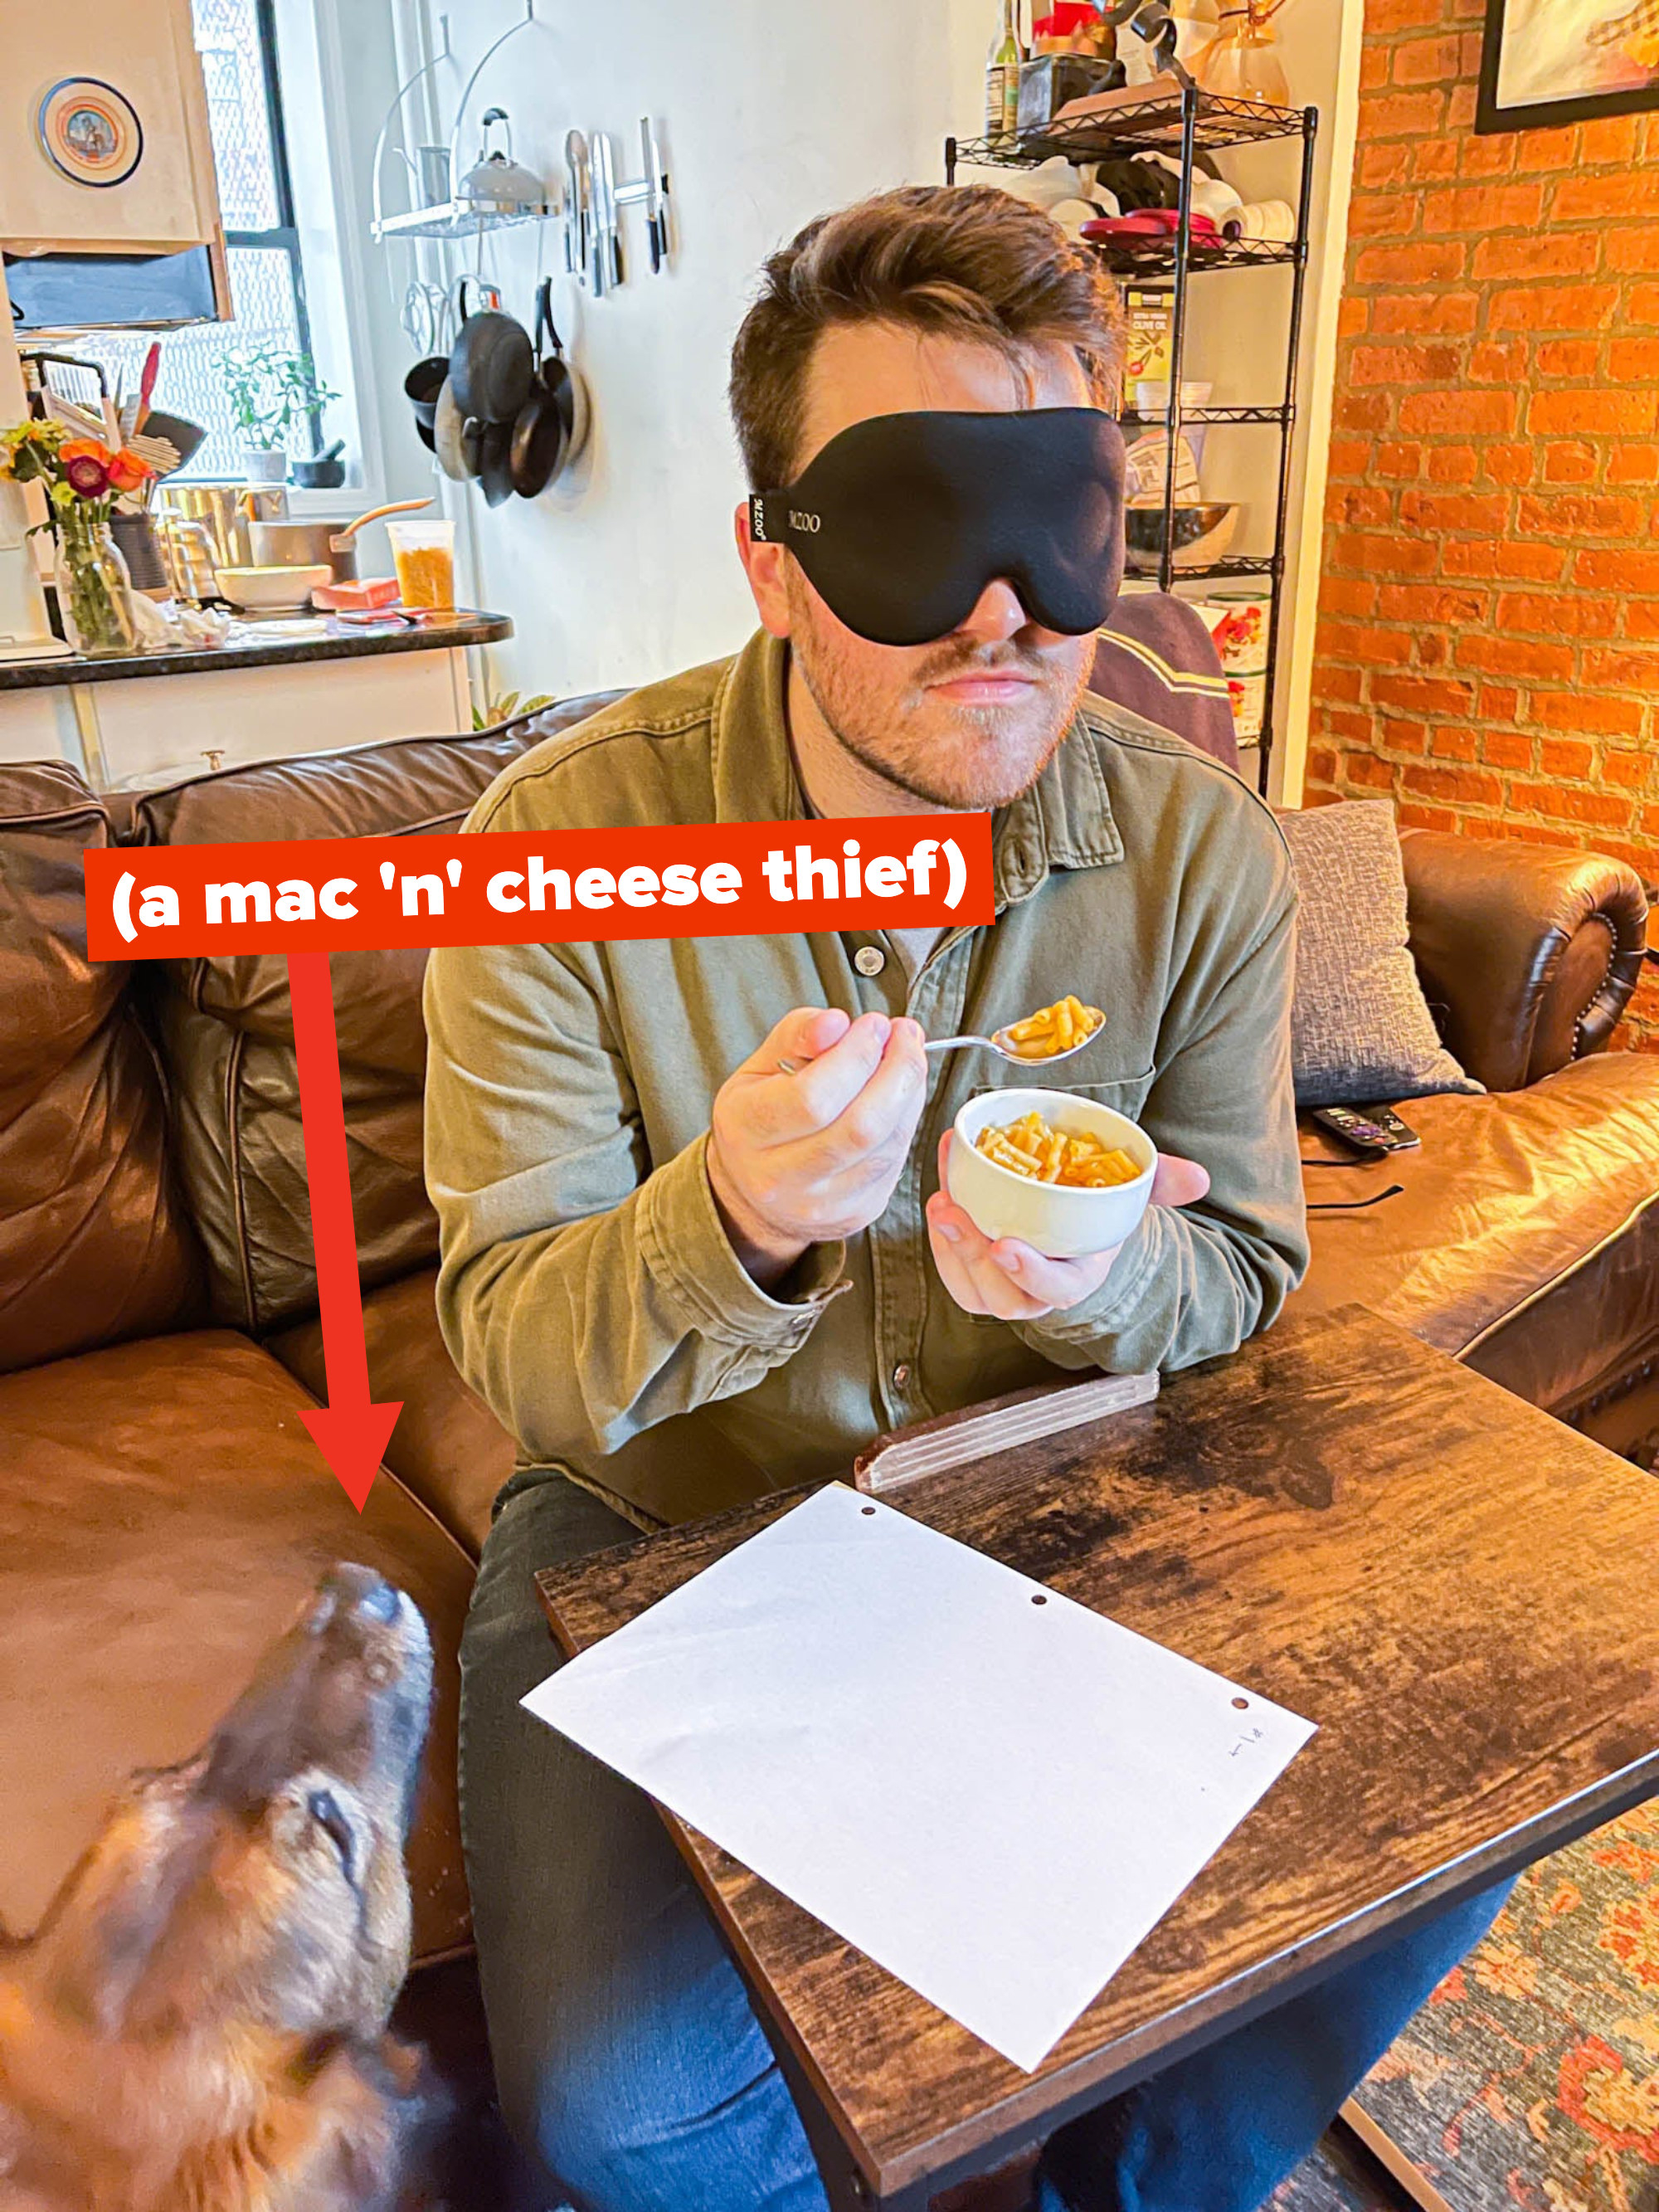 Arrow pointing to author&#x27;s dog with text &quot;a mac n cheese thief&quot; while the author eats a bowl of mac &#x27;n&#x27; cheese with a blindfold on